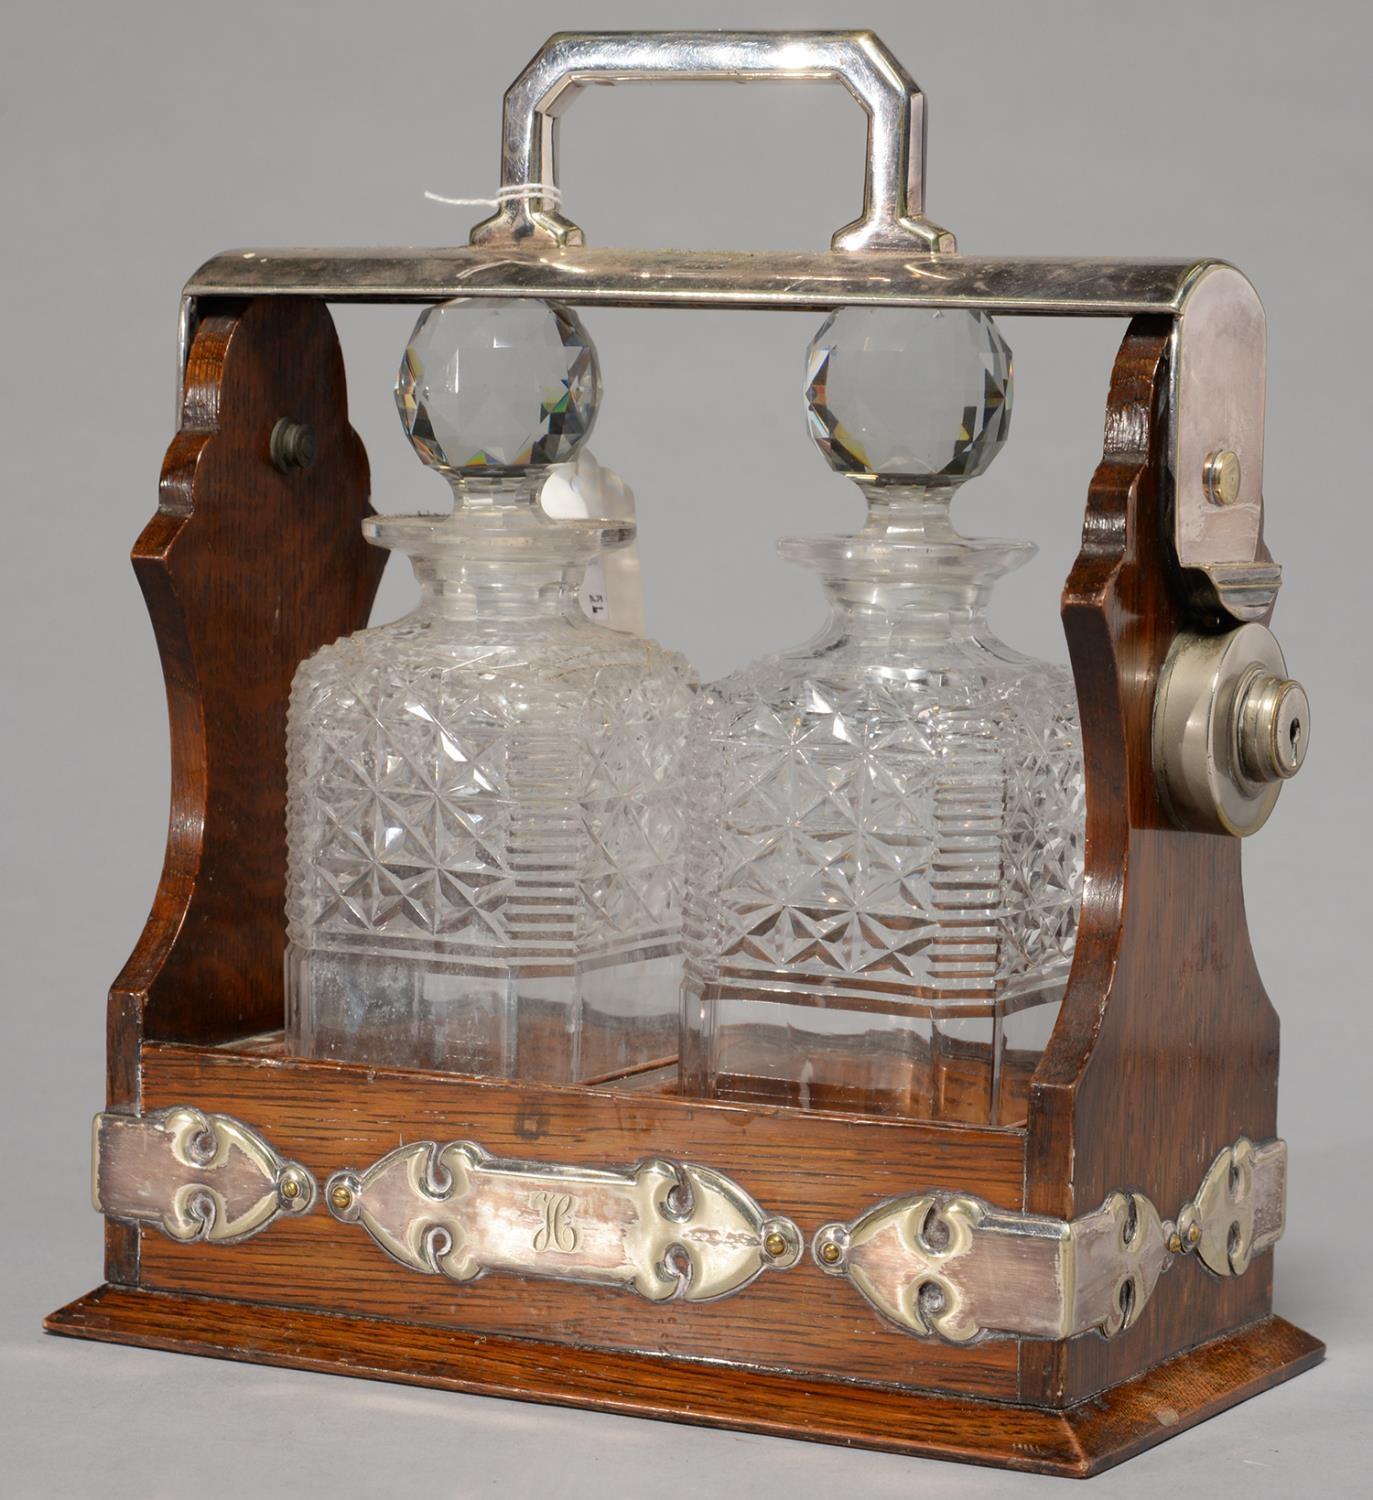 AN EDWARDIAN EPNS MOUNTED OAK TANTALUS, C1905, WITH PAIR OF CUT GLASS DECANTERS AND STOPPERS, 30CM H